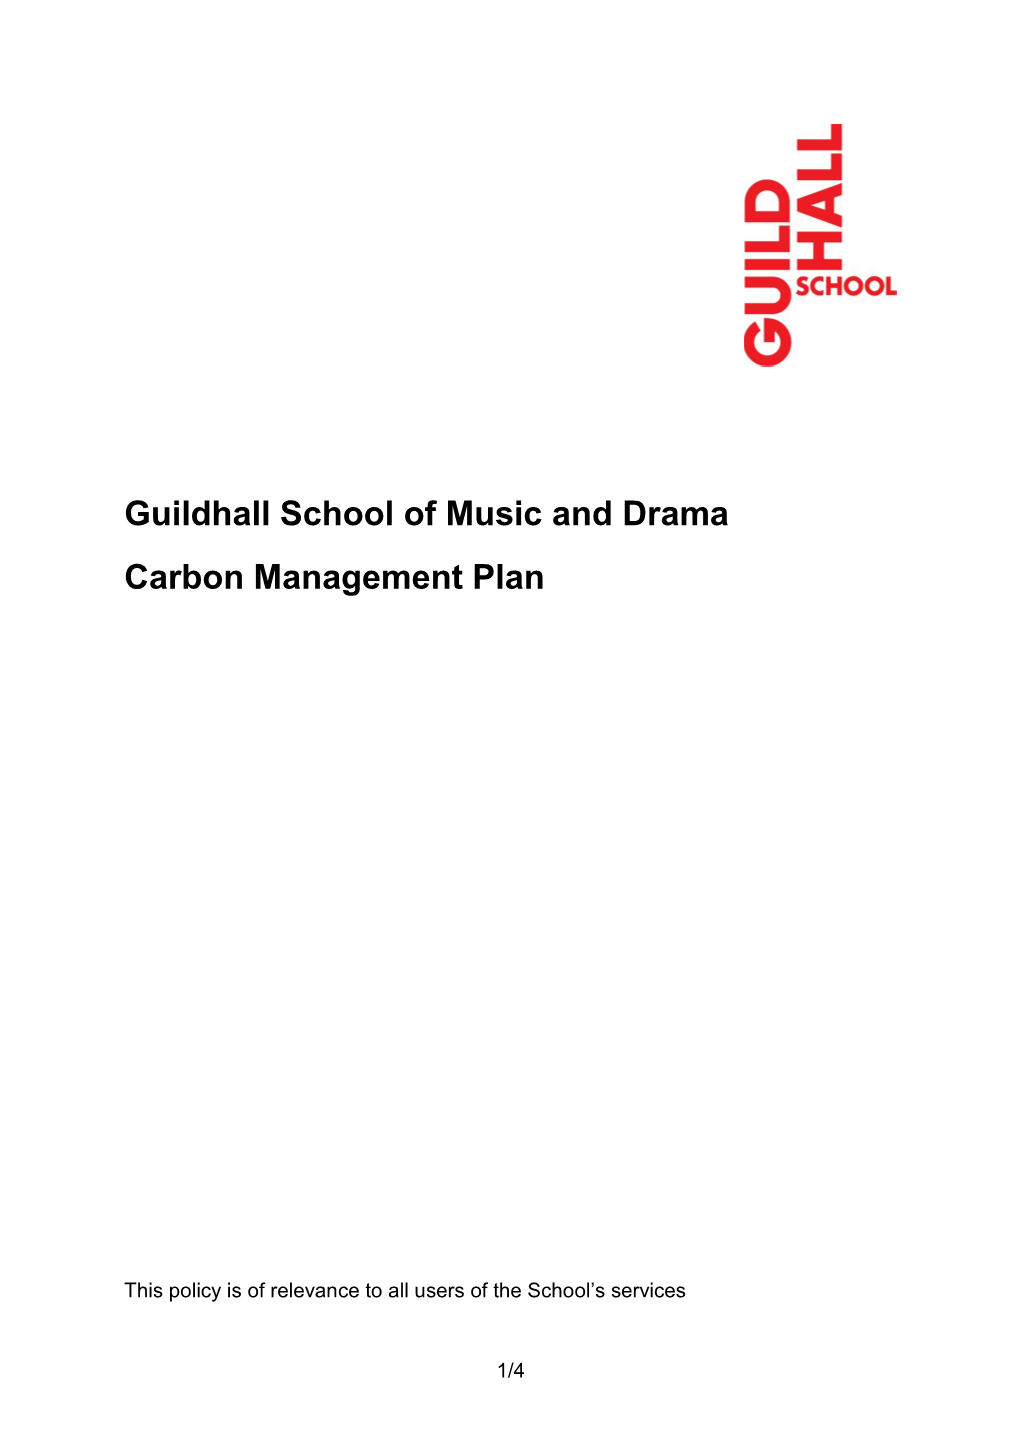 Guildhall School of Music and Drama Carbon Management Plan